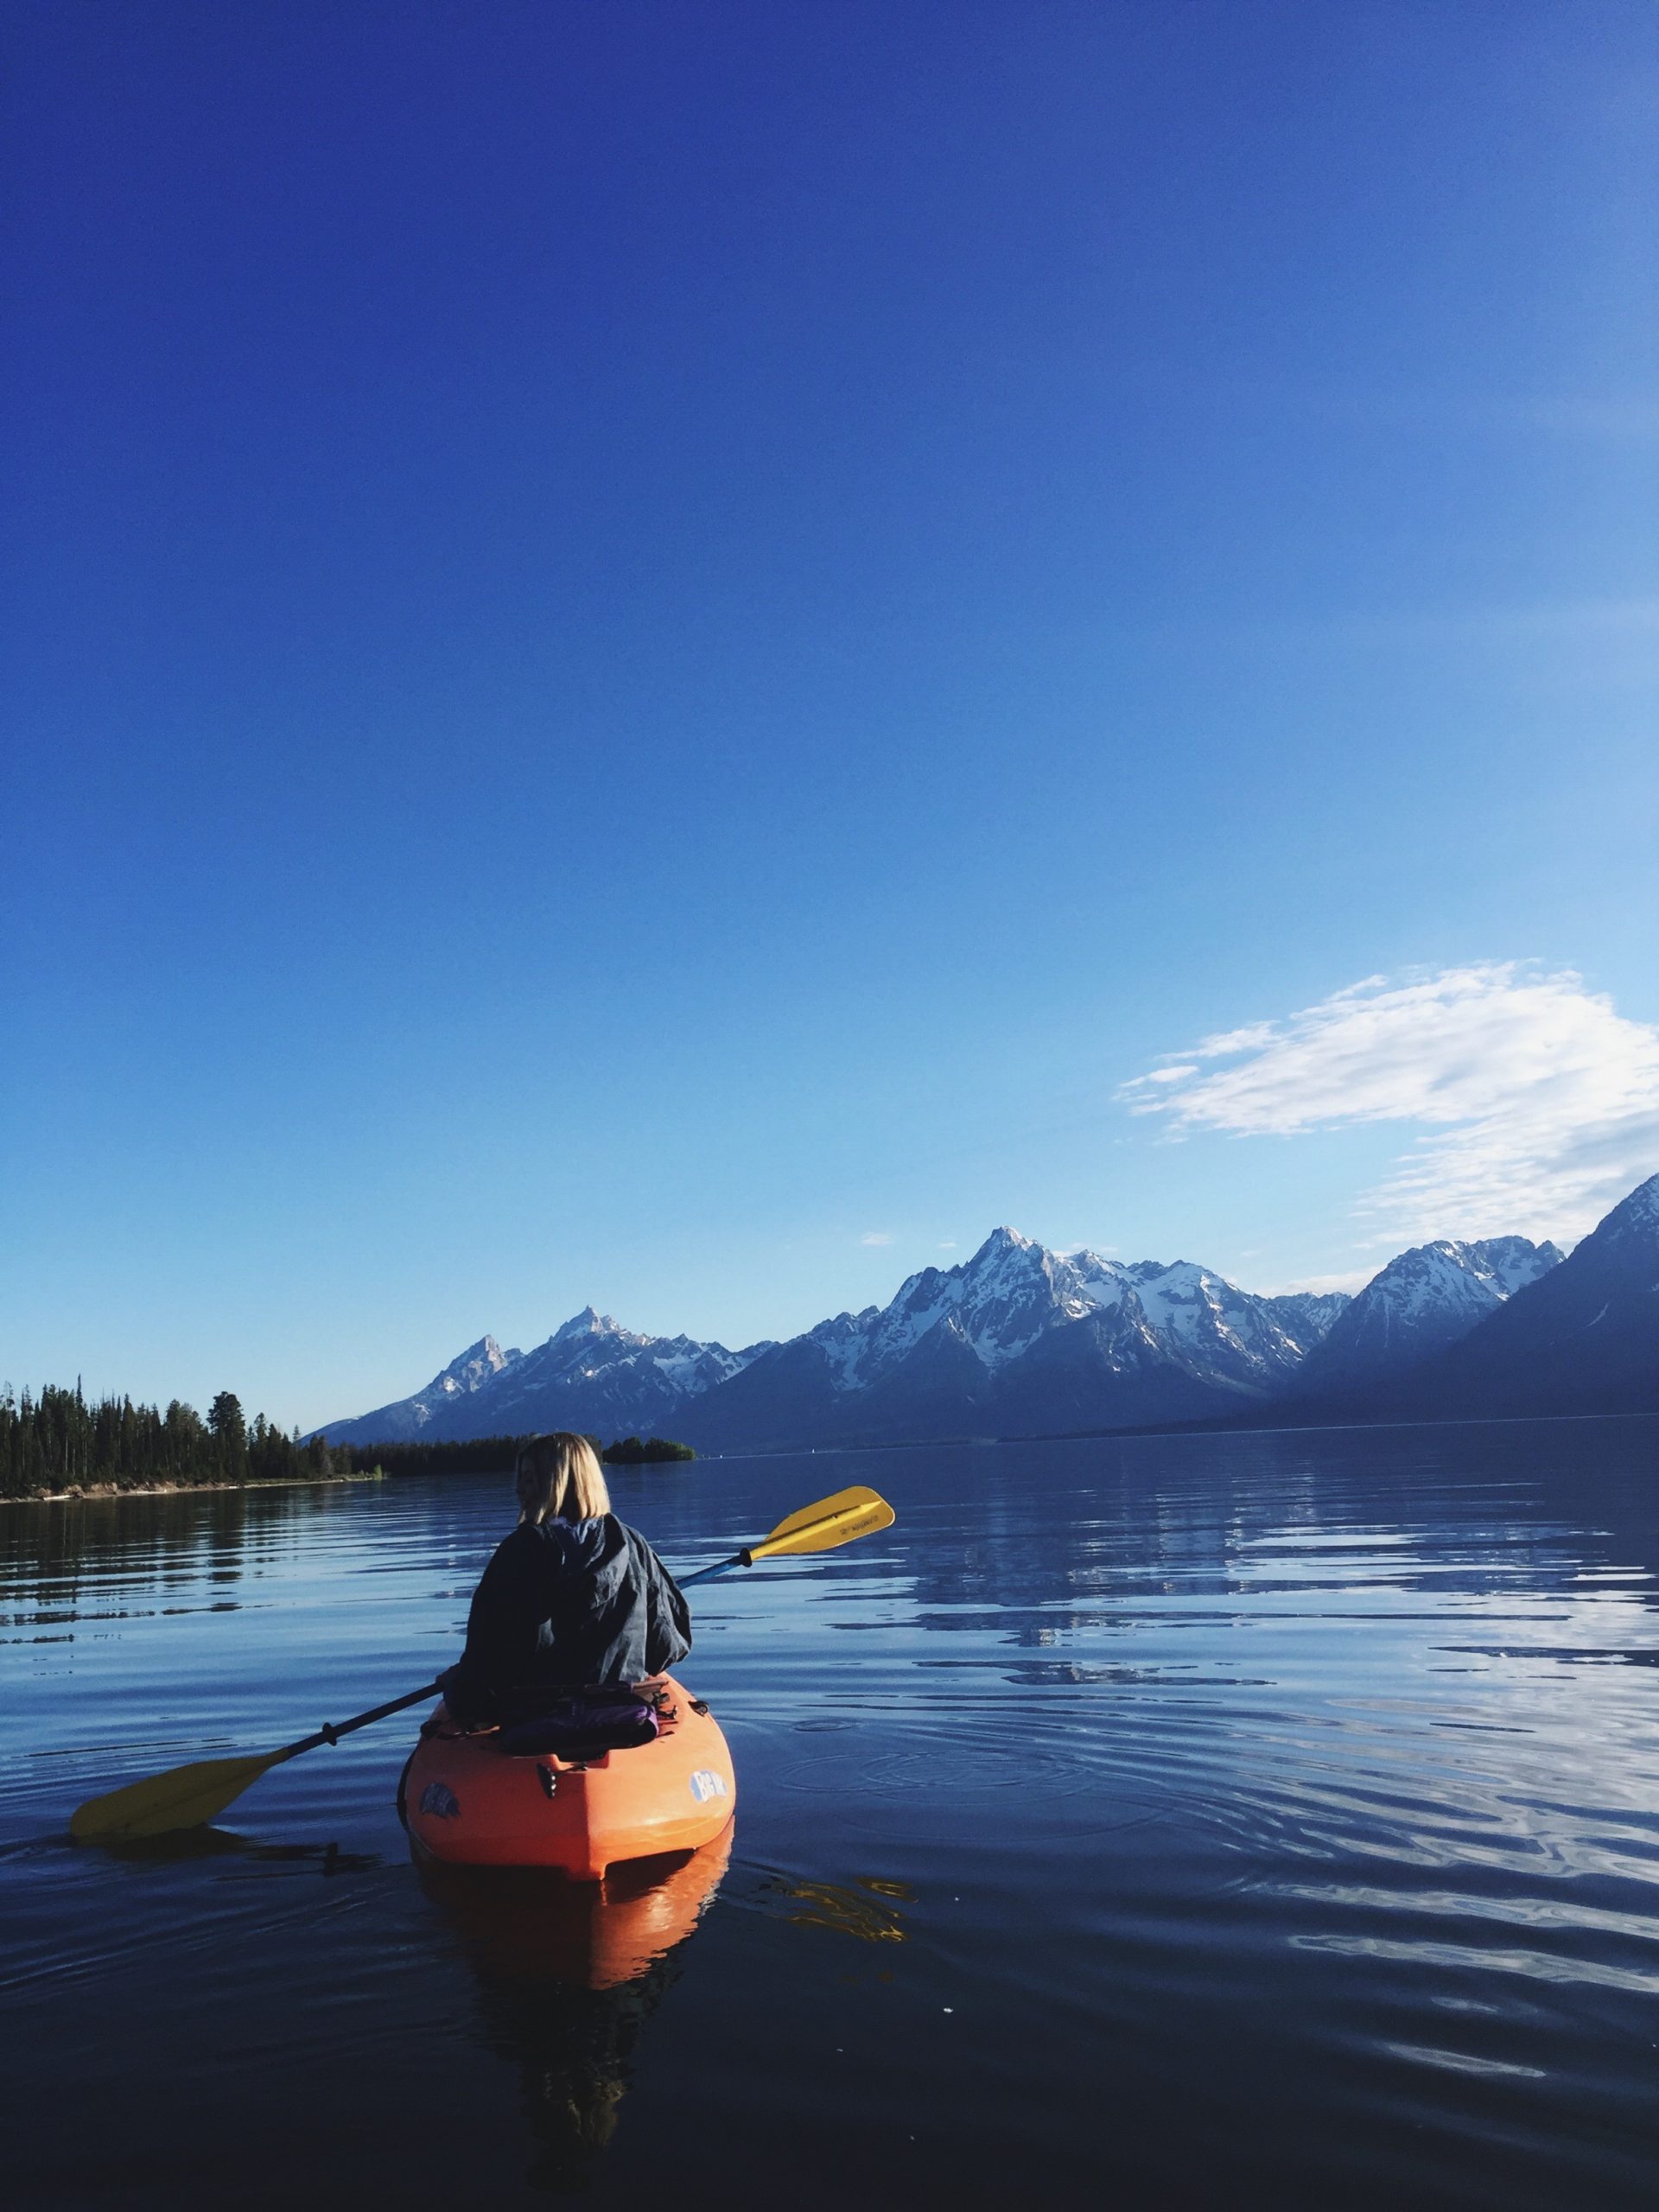 a woman kayaking on a large lake with mountains in the background on a clear day